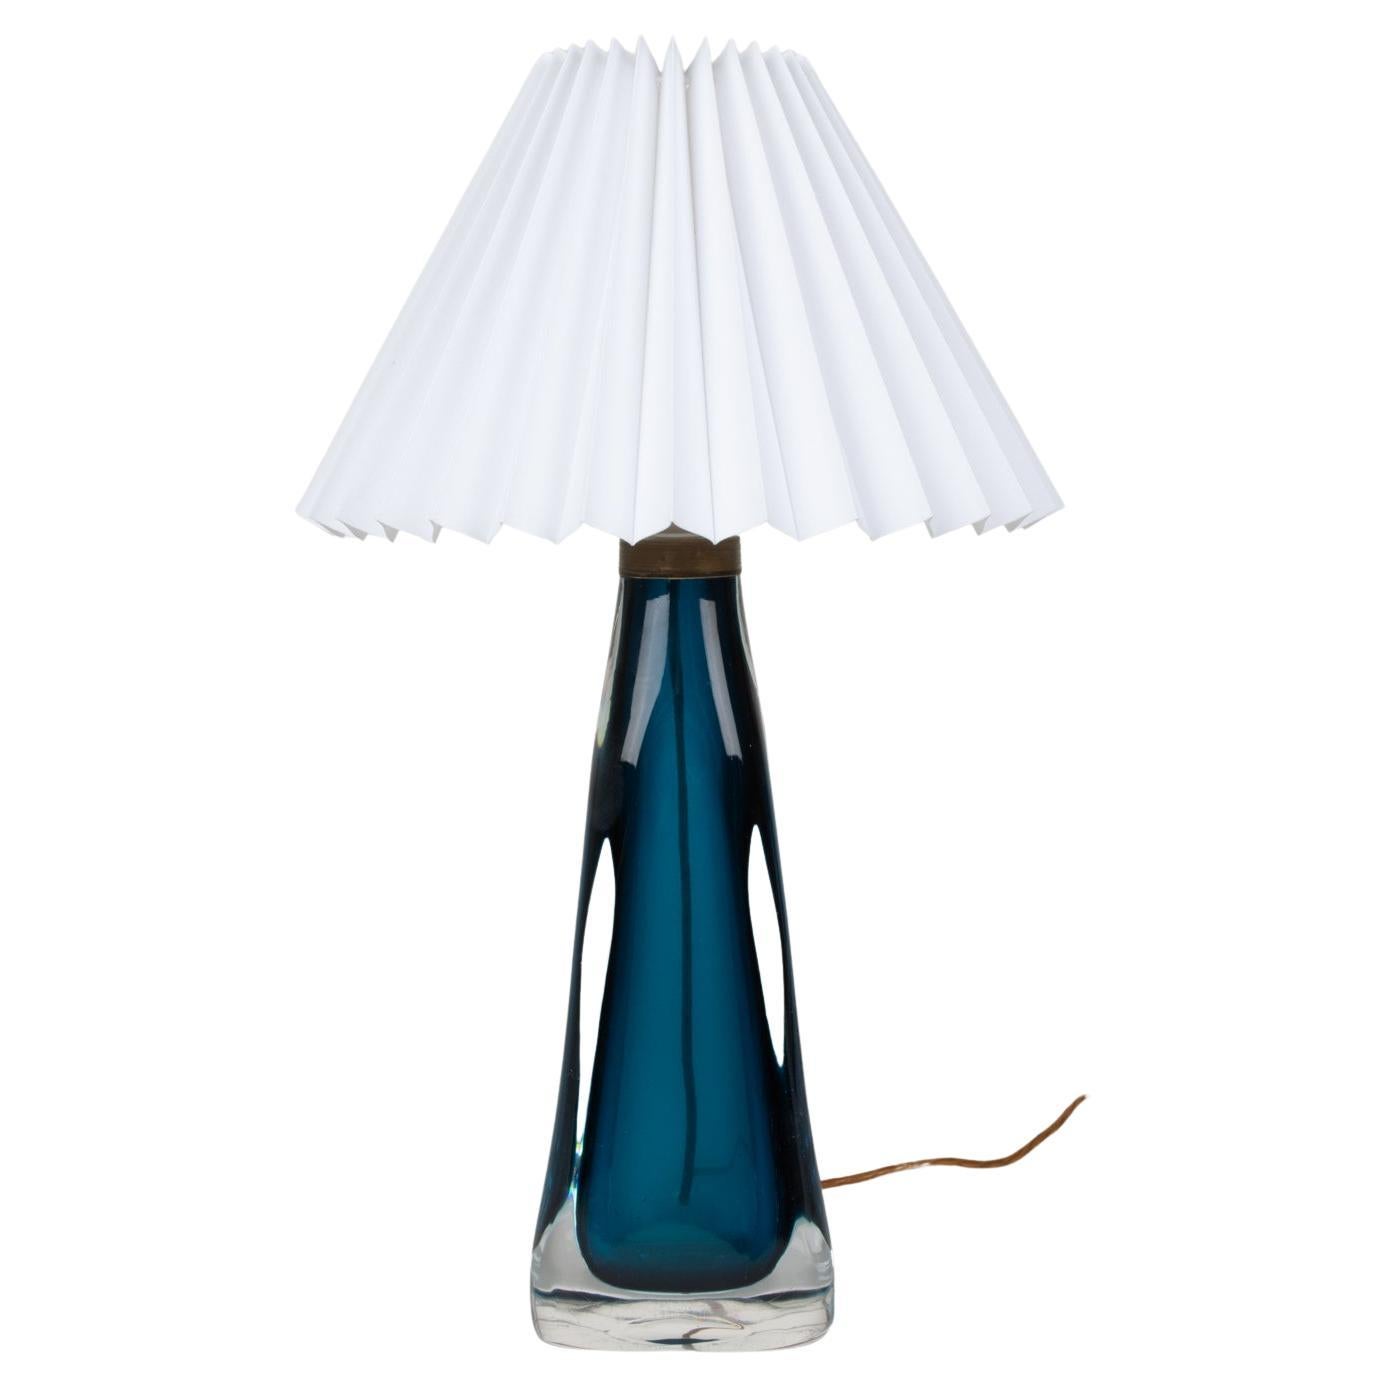 Carl Fagerlund for Orrefors Cased Glass Table Lamp